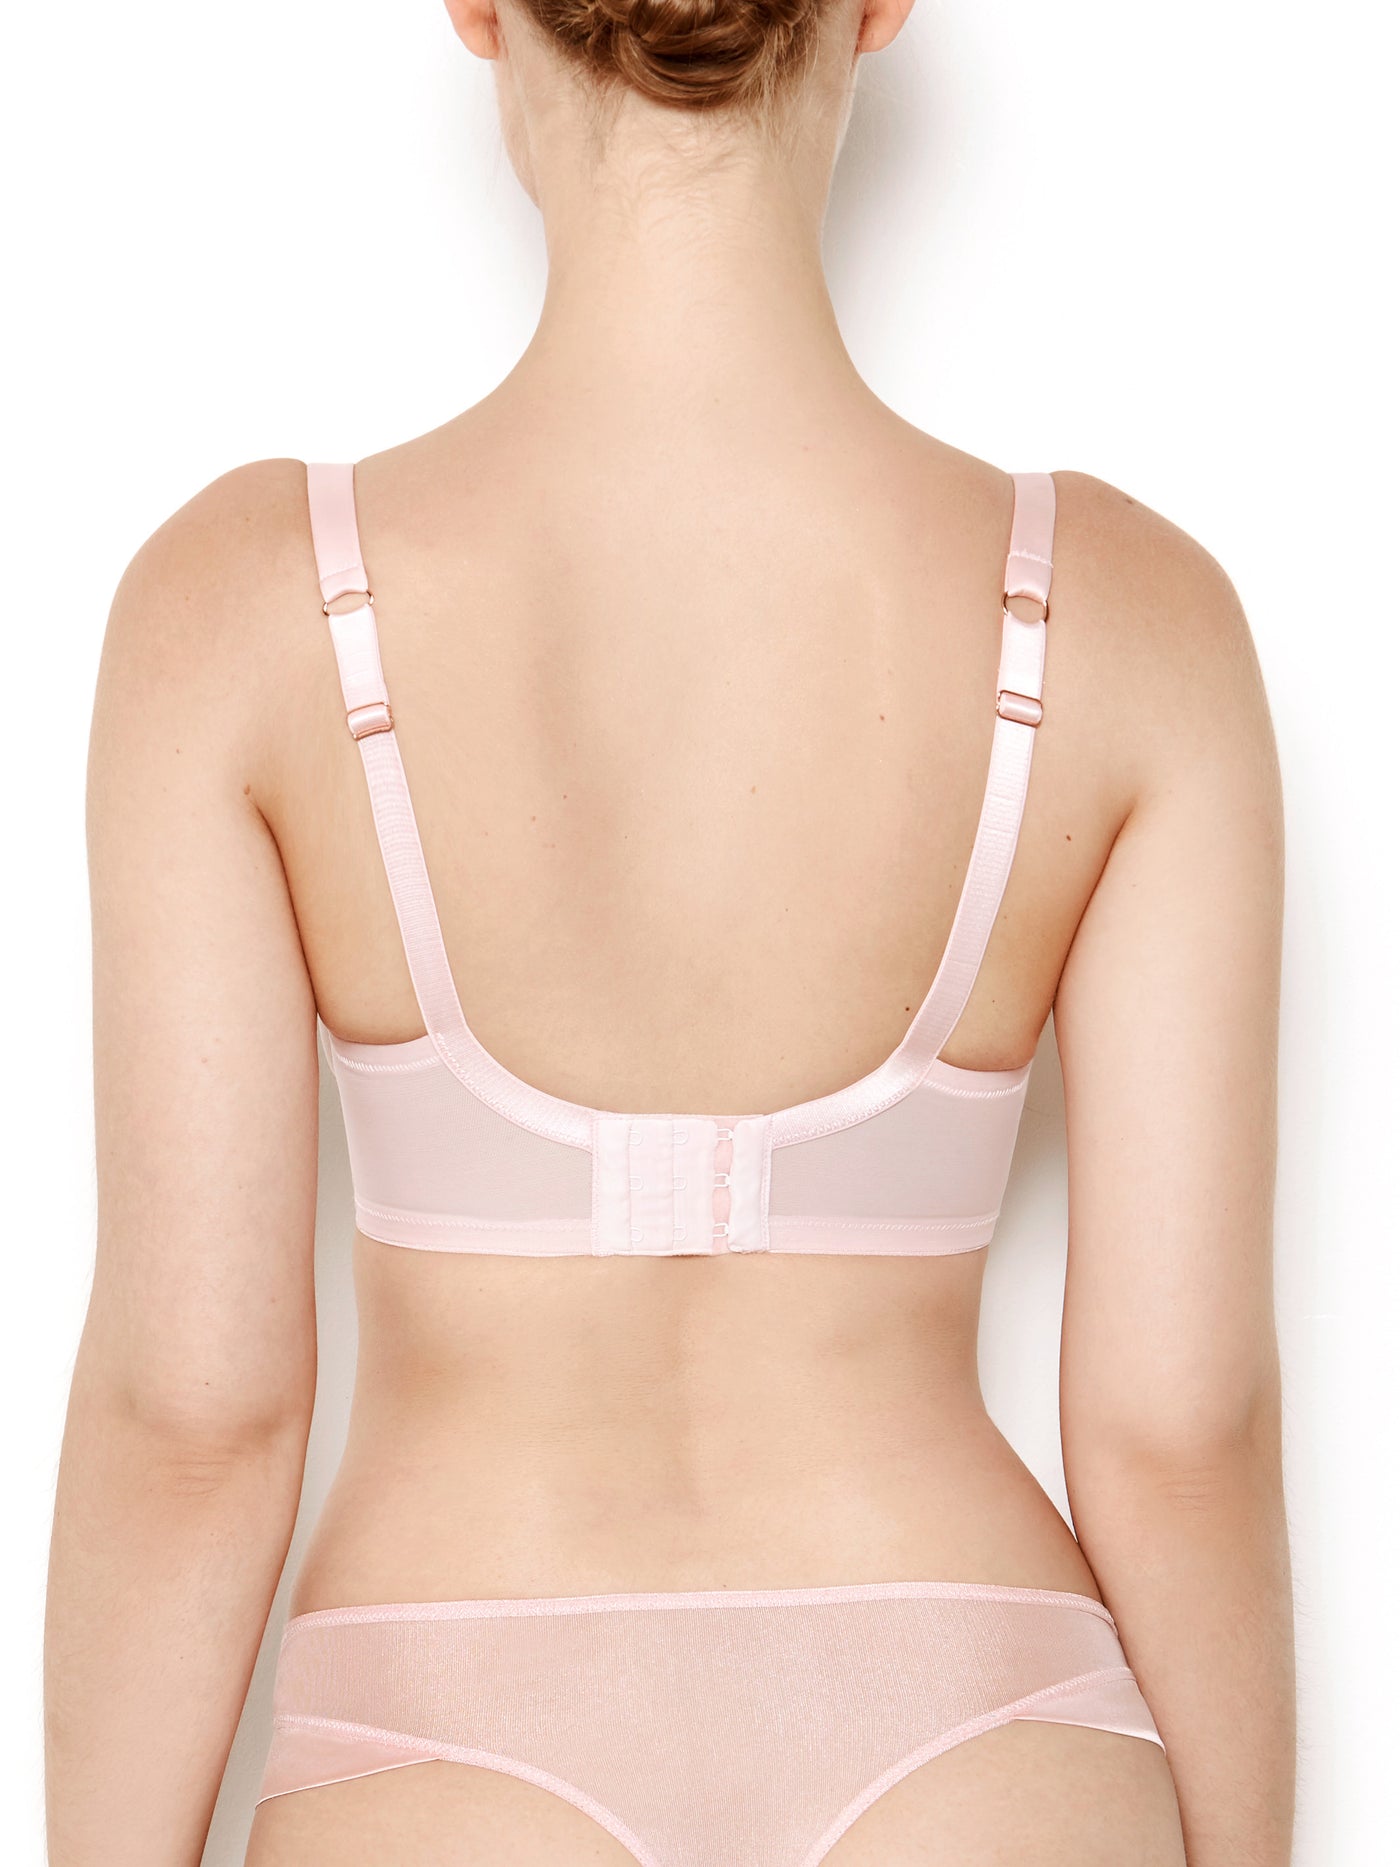 Maya Padded Non Wired Bra - Grey / Rose #44545 – The Pink Boutique